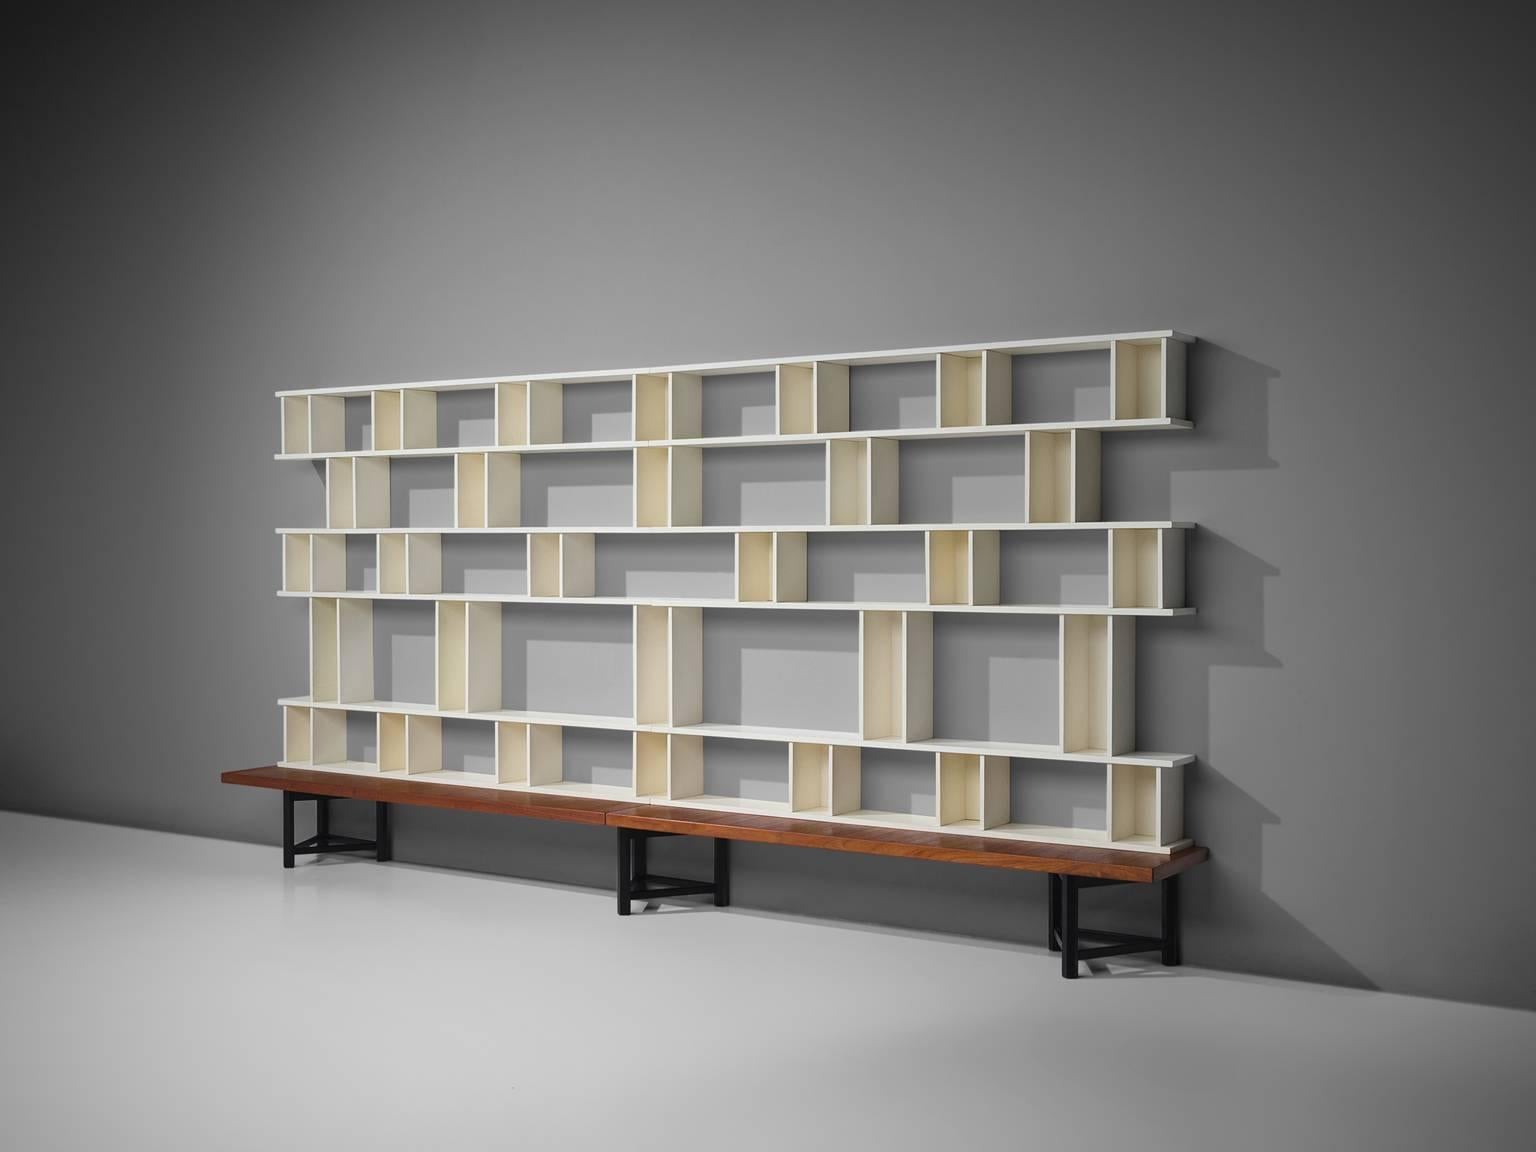 Carl Gustaf Hiort af Ornäs, bookcase, teak, wood, Finland, design 1960s, production 1970s.

This bookcase is designed by the Finnish designer Carl Gustaf Hiort. The bookcase is built of several wooden elements in different colors, resulting in a